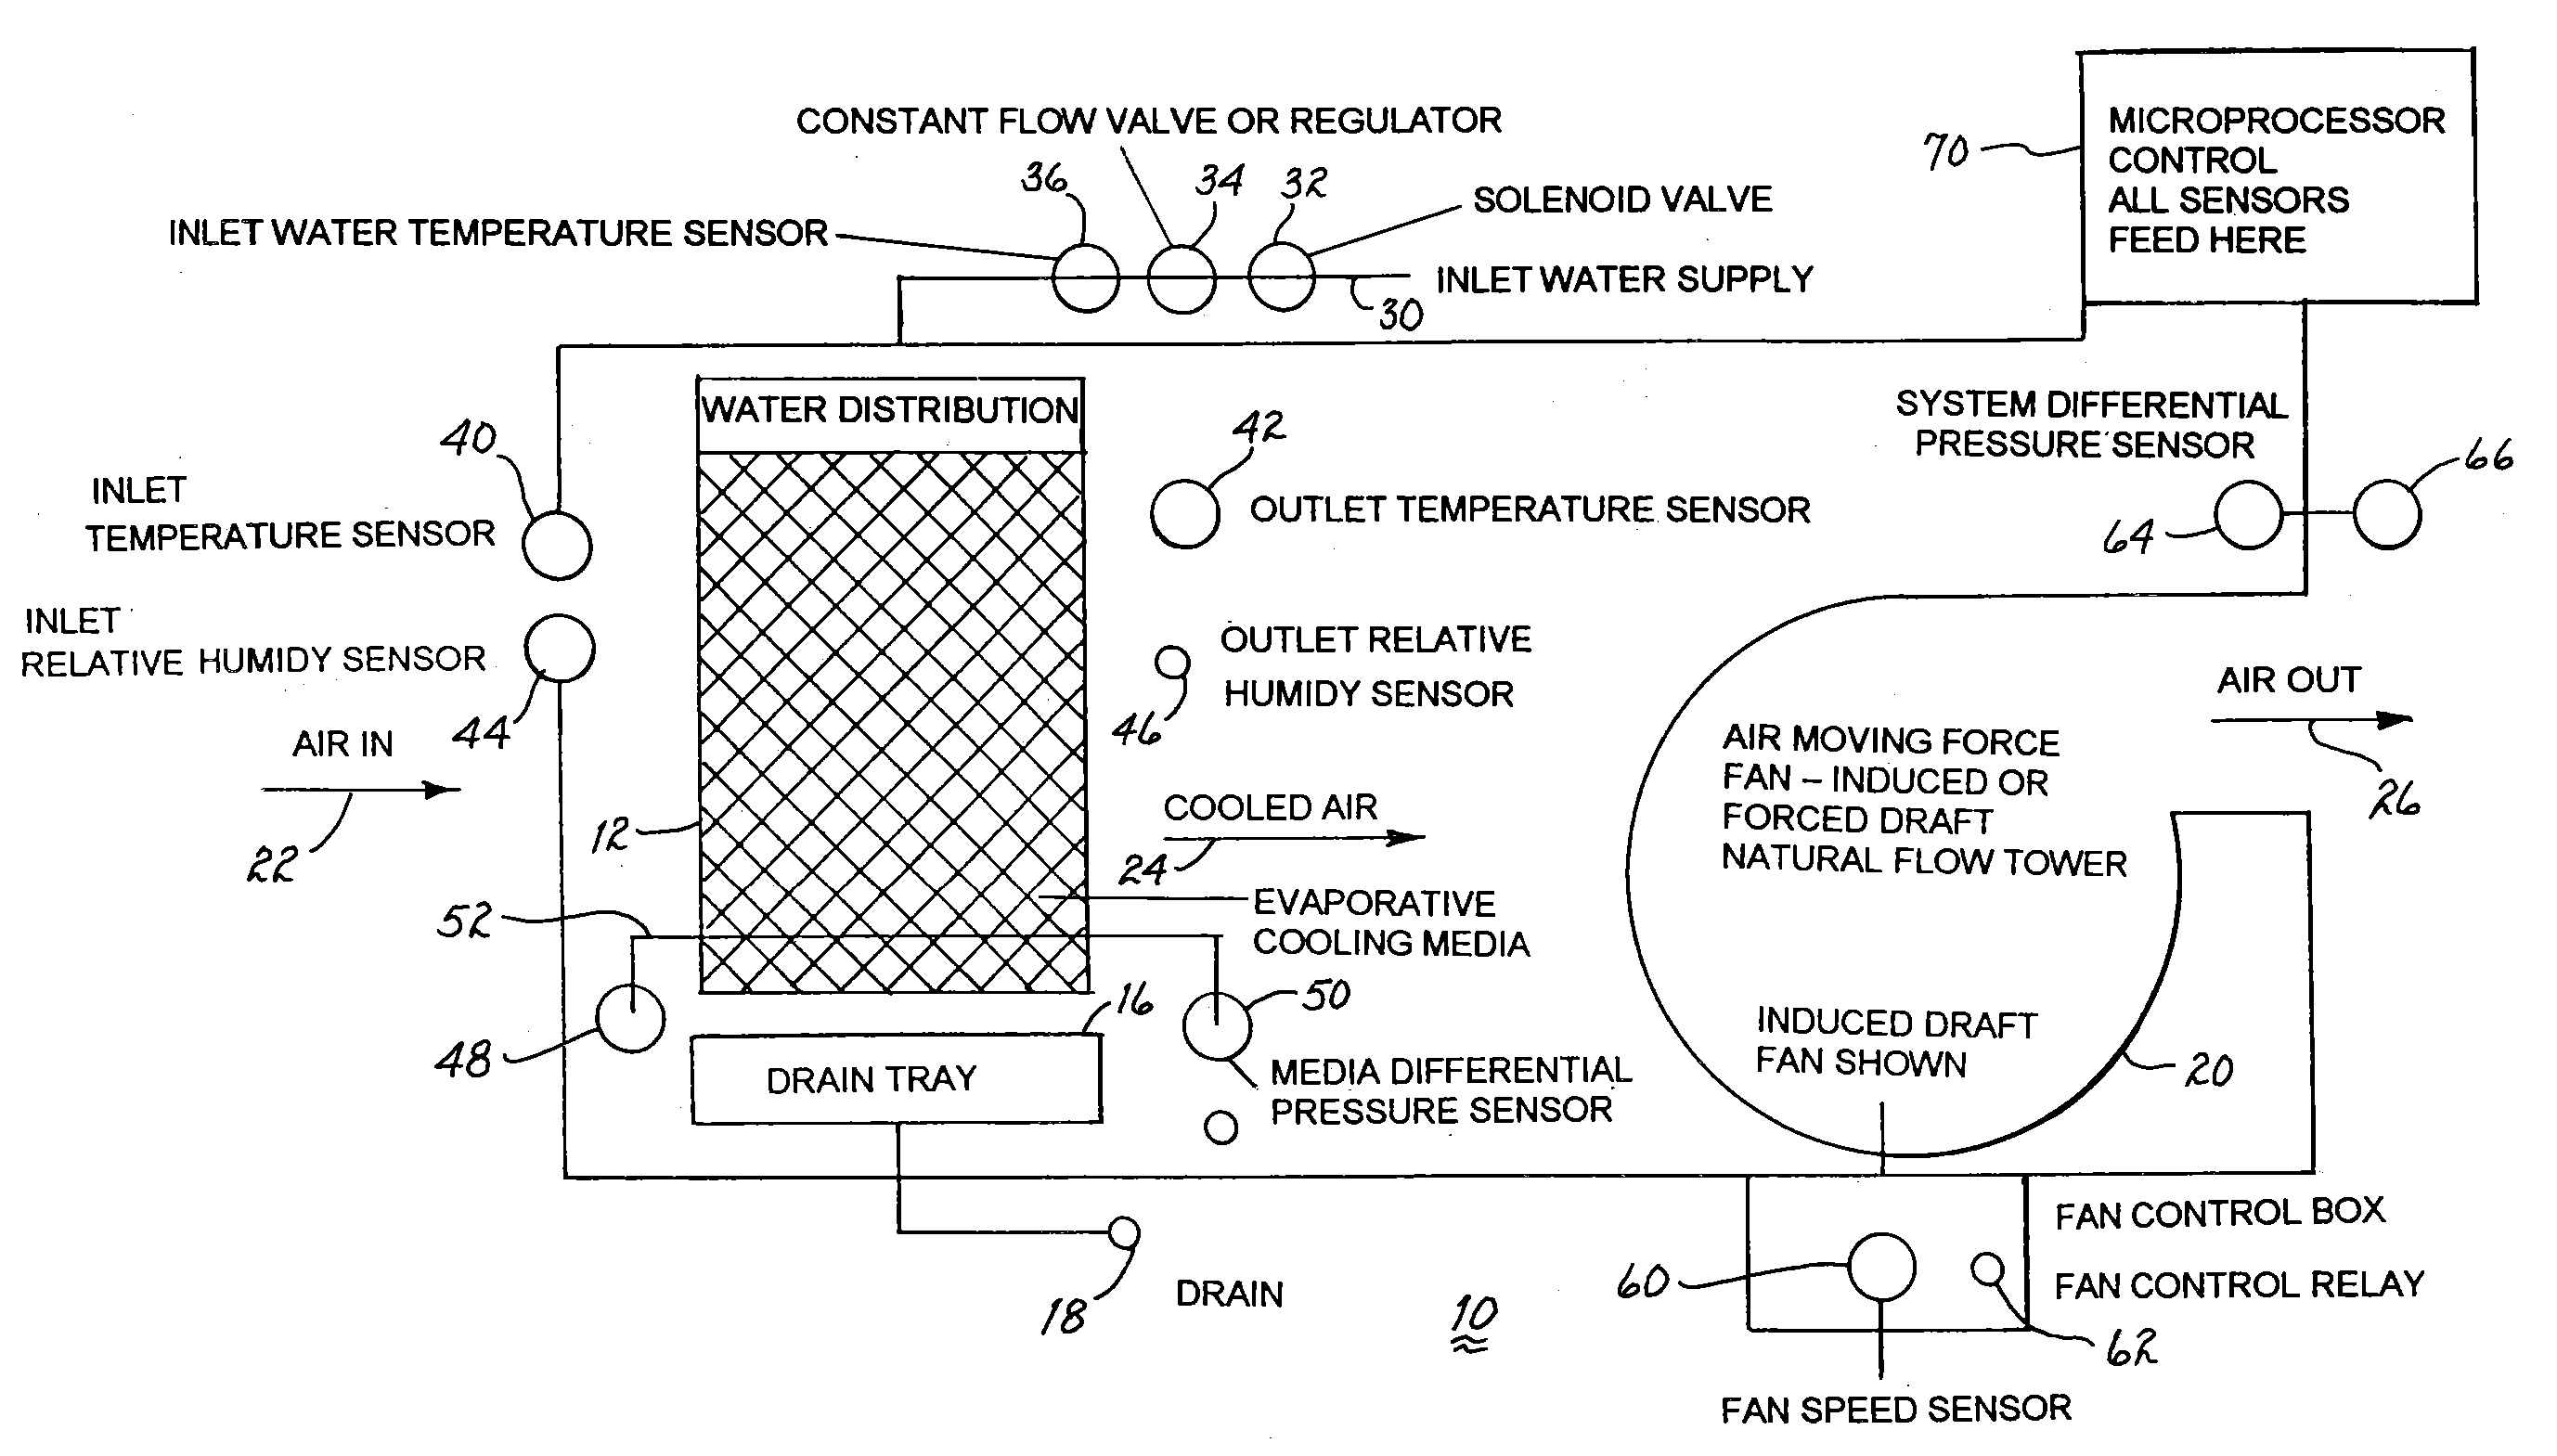 Non Uniform Water Distribution System for an Evaporative Cooler